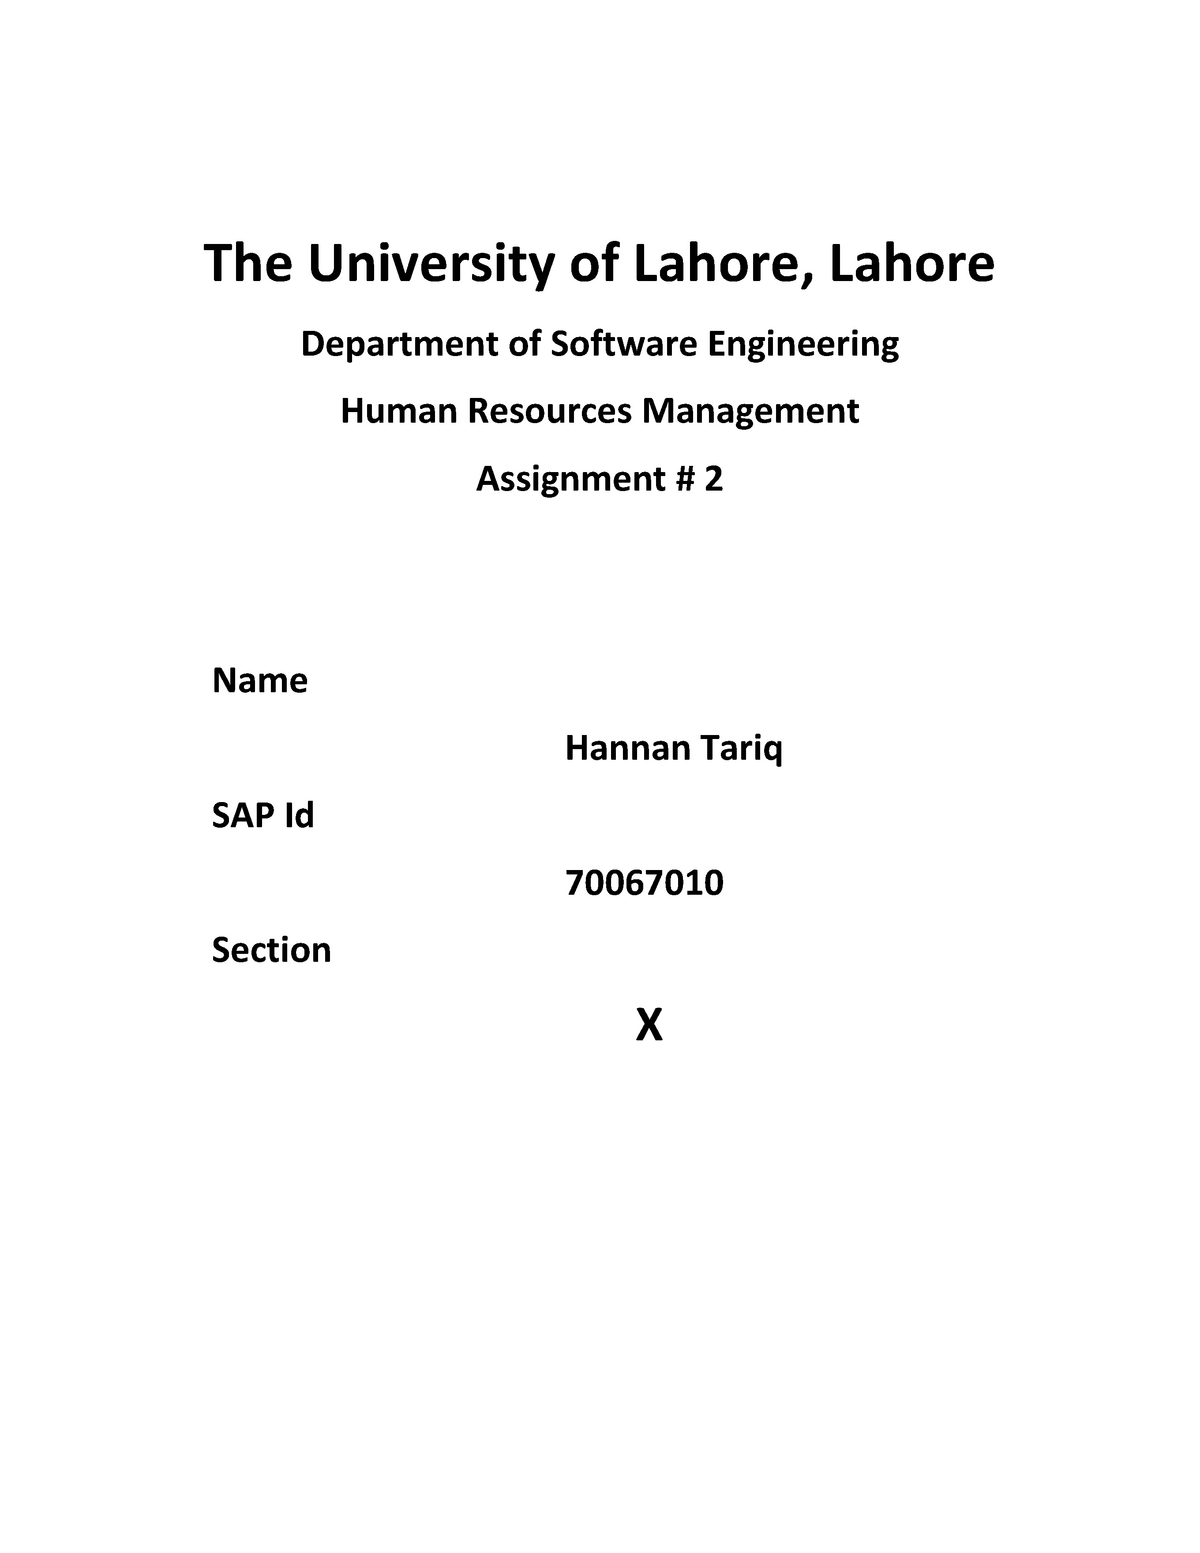 assignment work in lahore